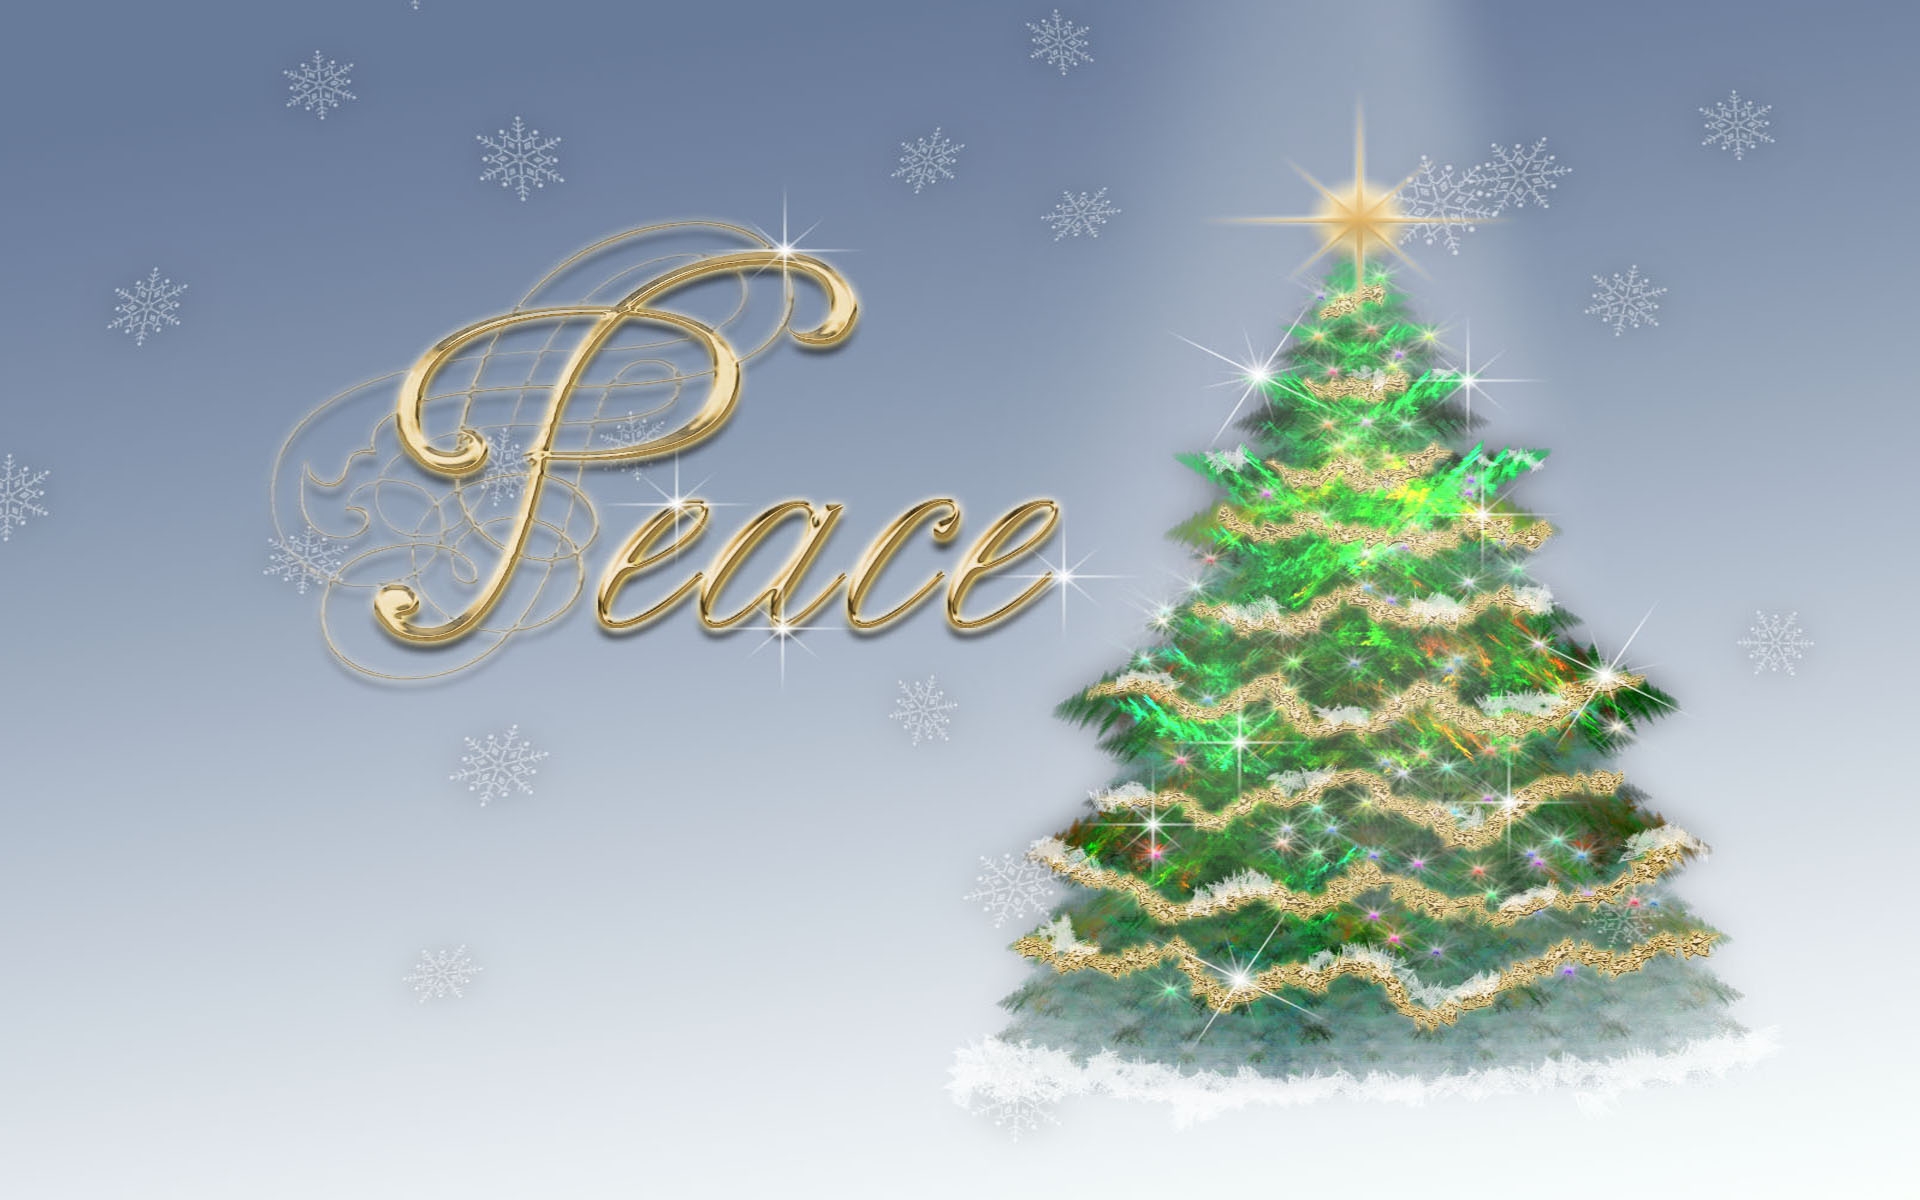 christmas peace wallpaper which is under the christmas wallpapers